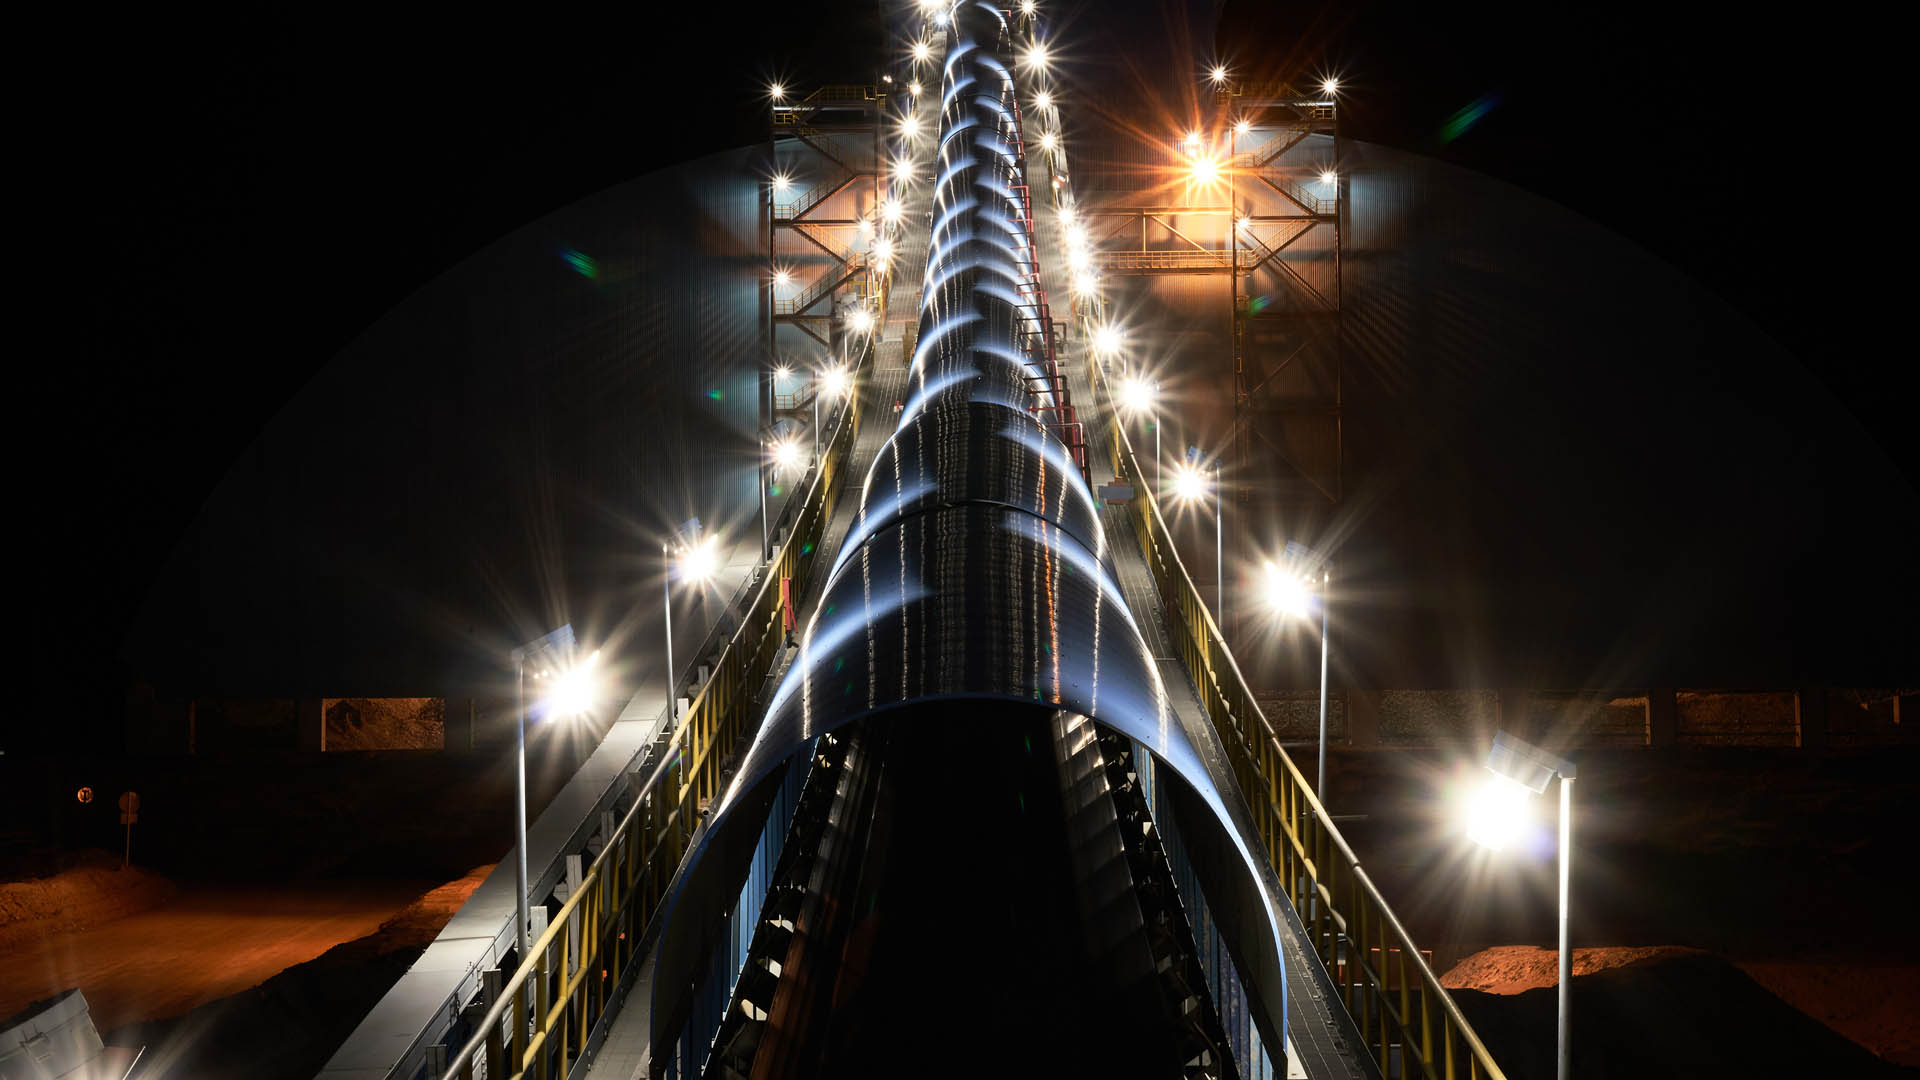 Oyu Tolgoi concentrator at night